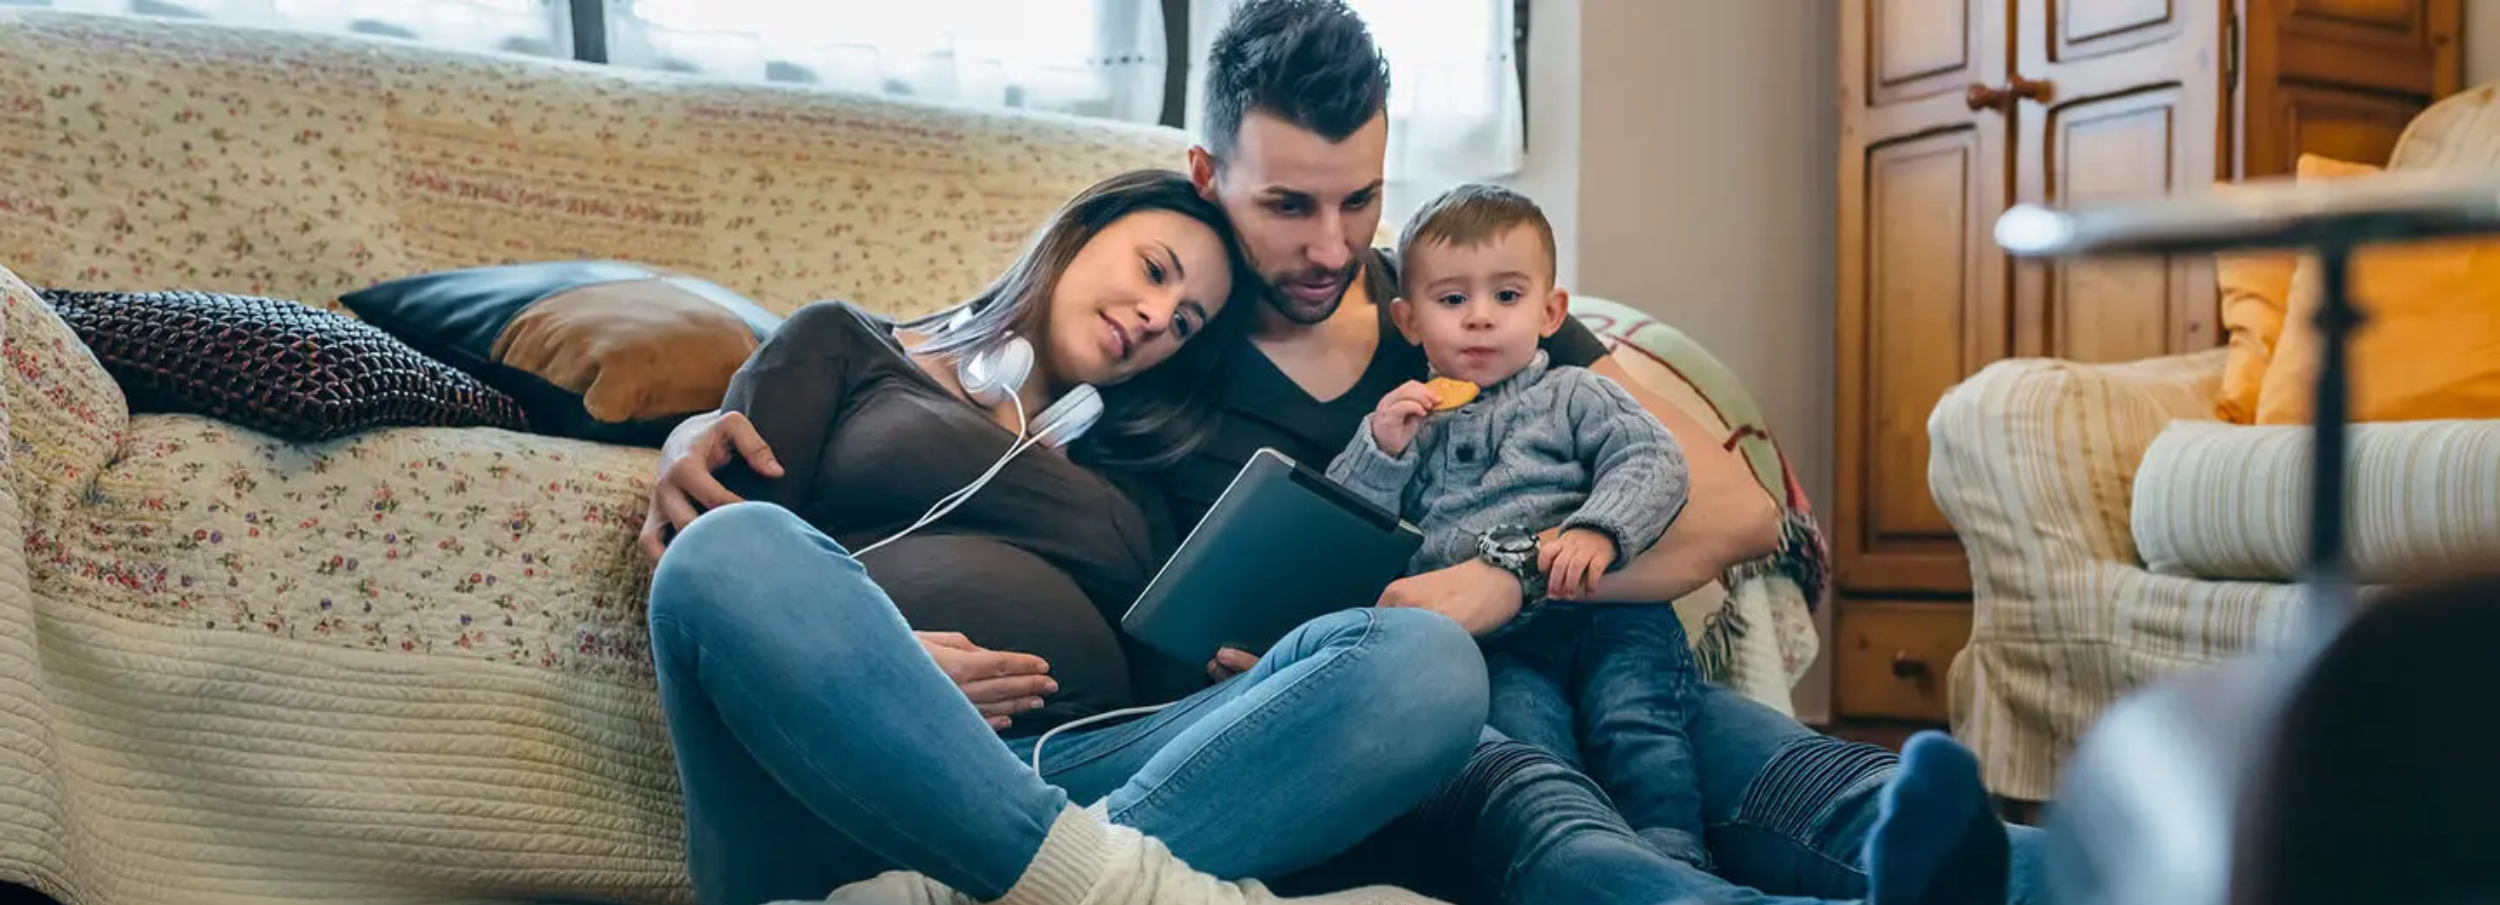 Pregnant woman with man and small boy sitting in front of sofa looking at a tablet.